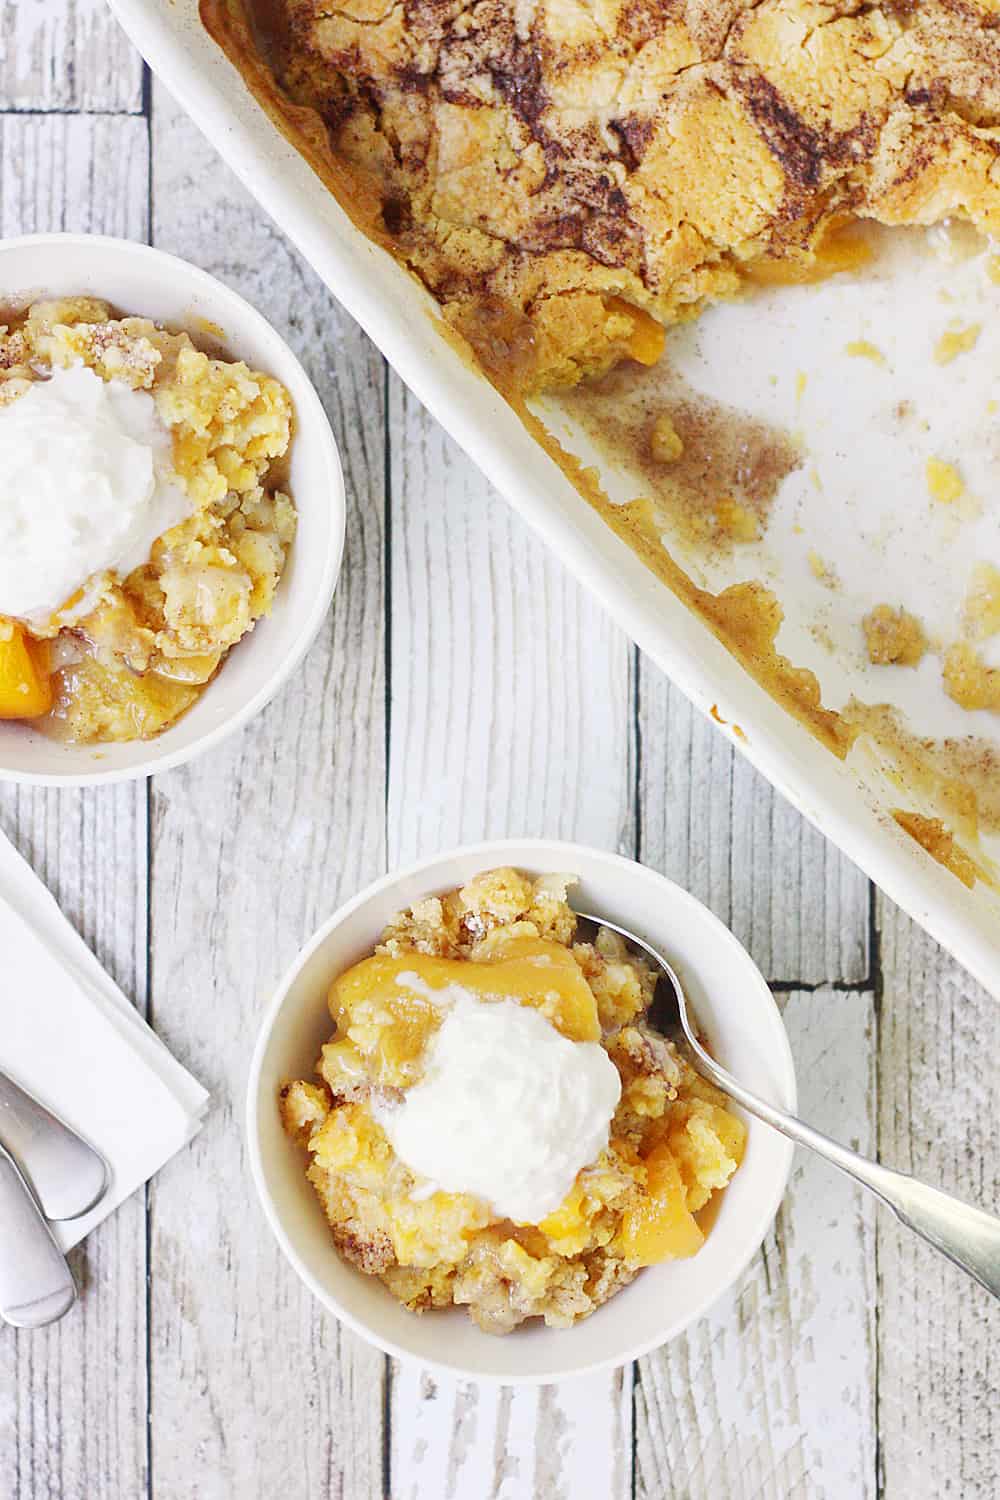 Easy Peach Cobbler Dump Cake -- Easy peach cobbler dump cake is sure to become a summer staple! This mouthwatering peach cobbler recipe requires only four ingredients and five minutes of prep! #cake #peachcobbler #dumpcake #dessert #easyrecipe #cakemix #cobbler #peach